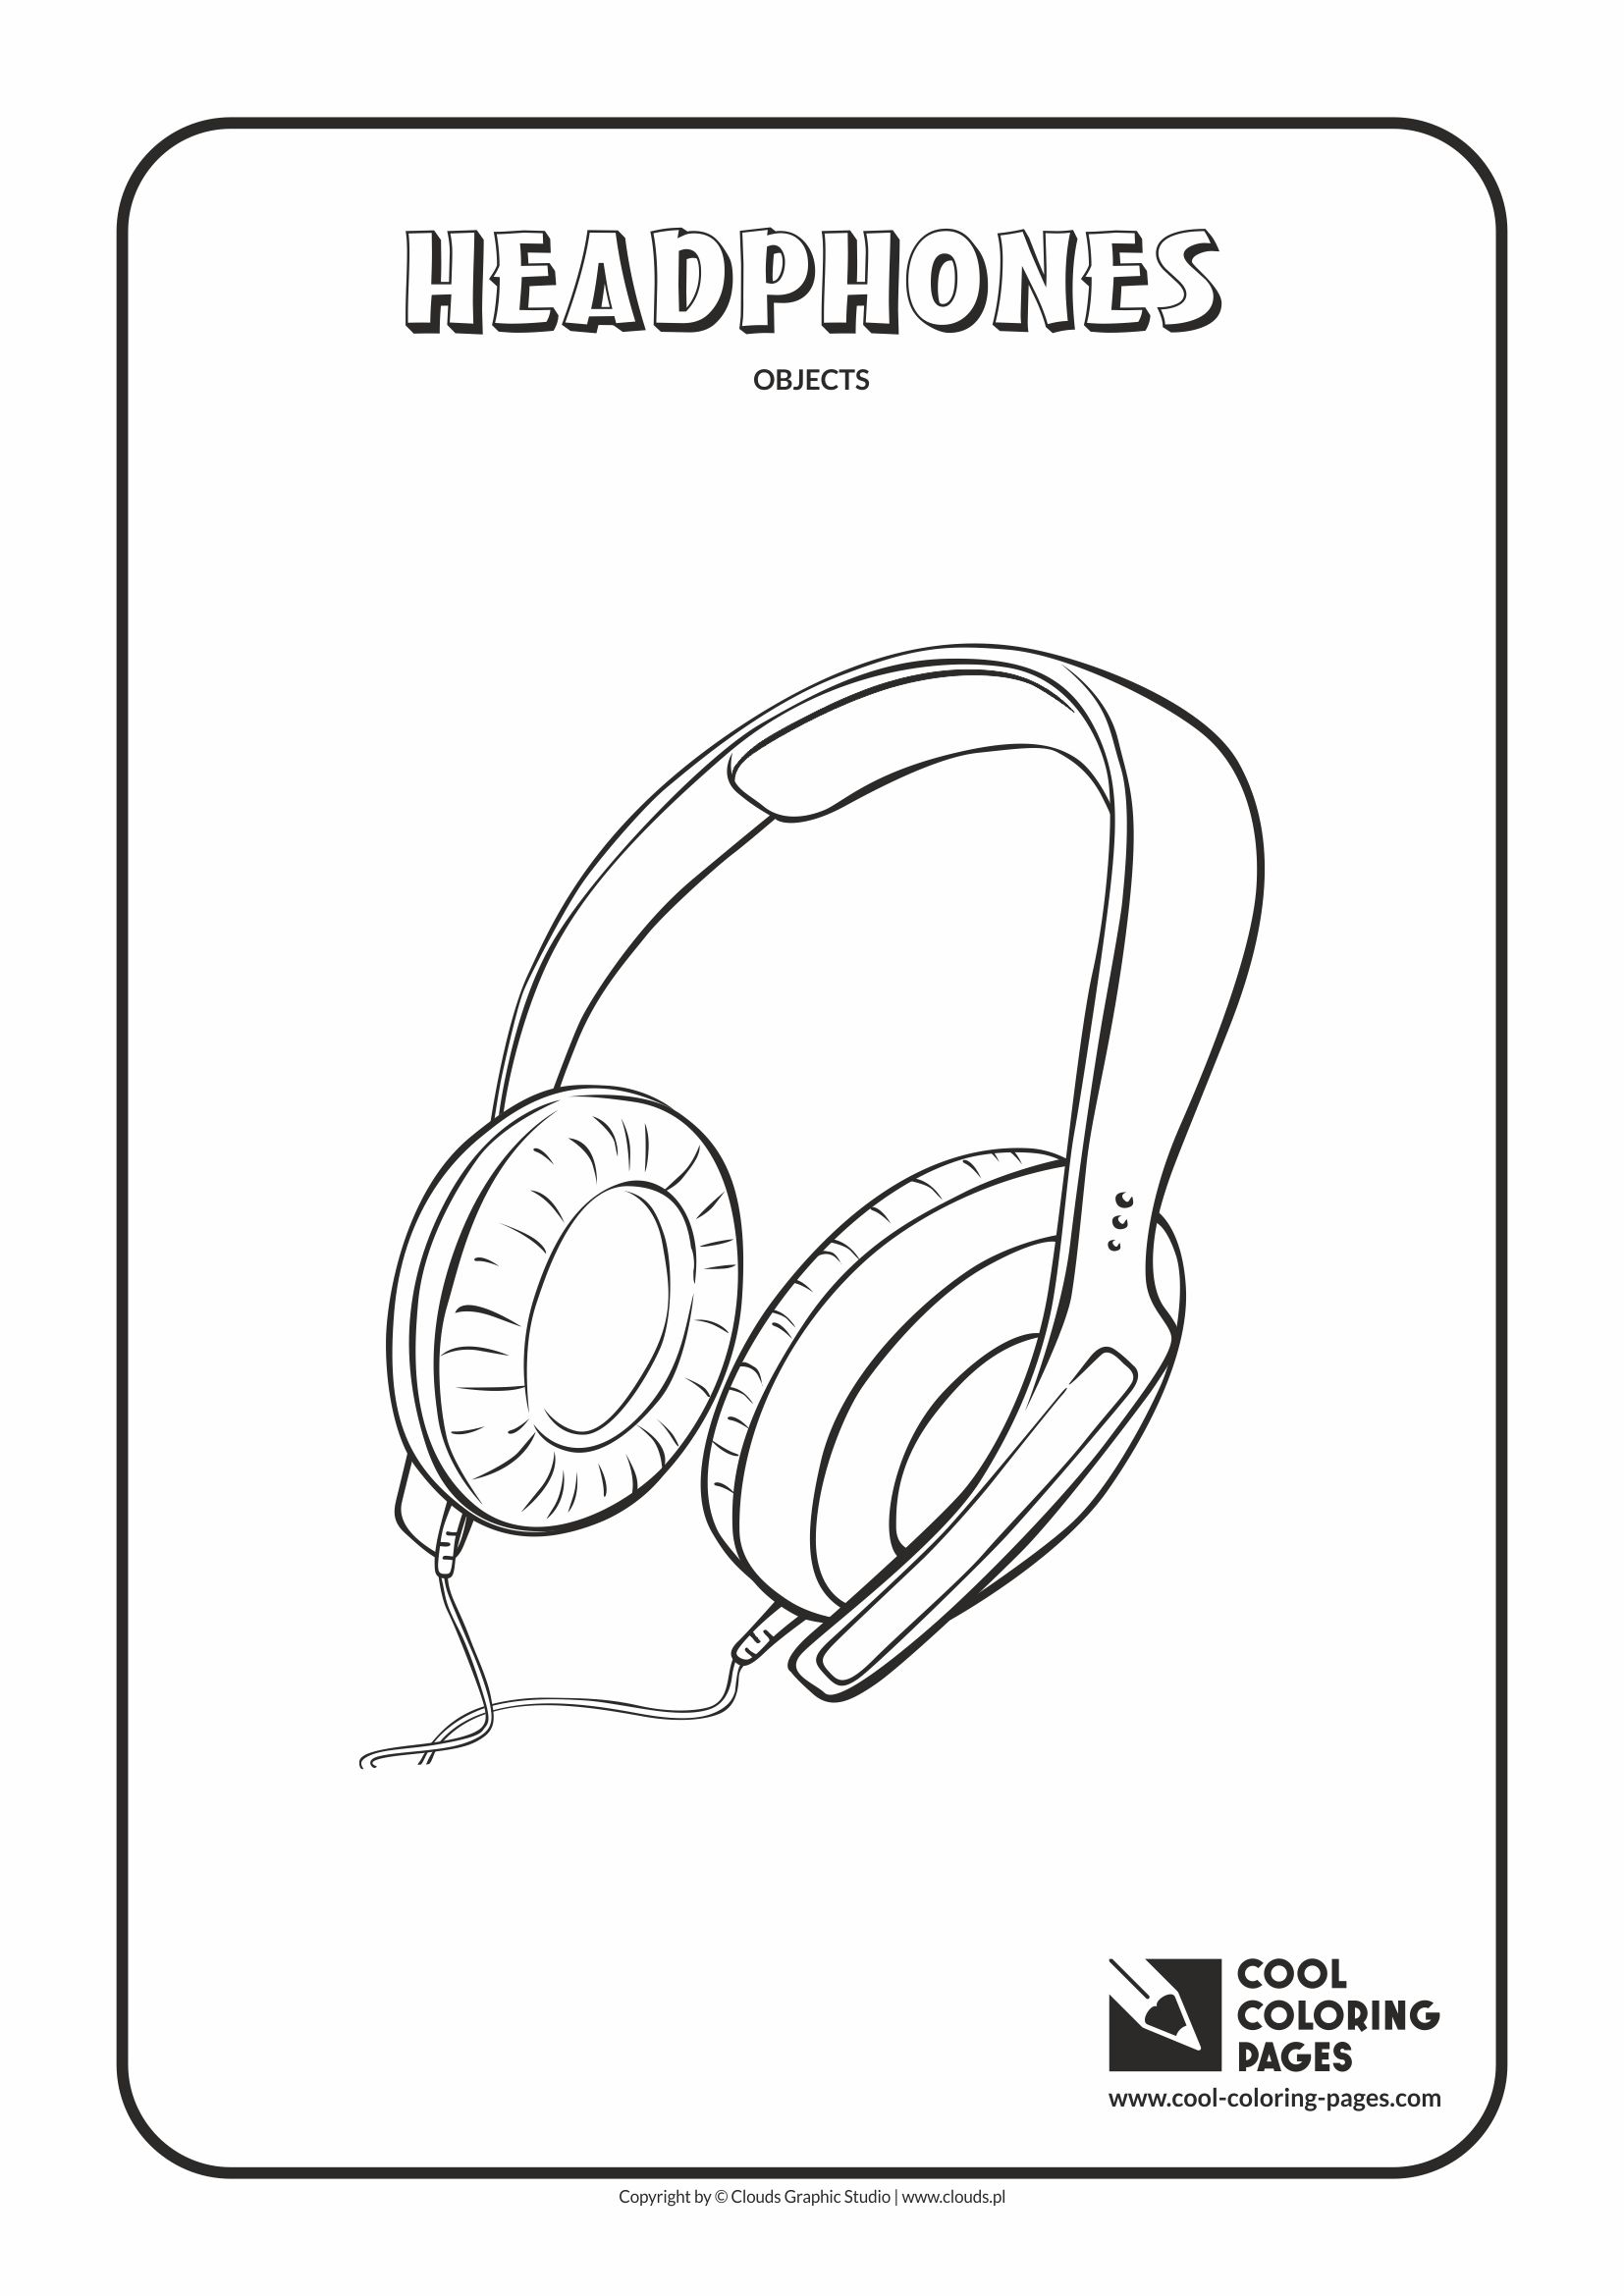 Cool Coloring Pages - Coloring objects / Headphones